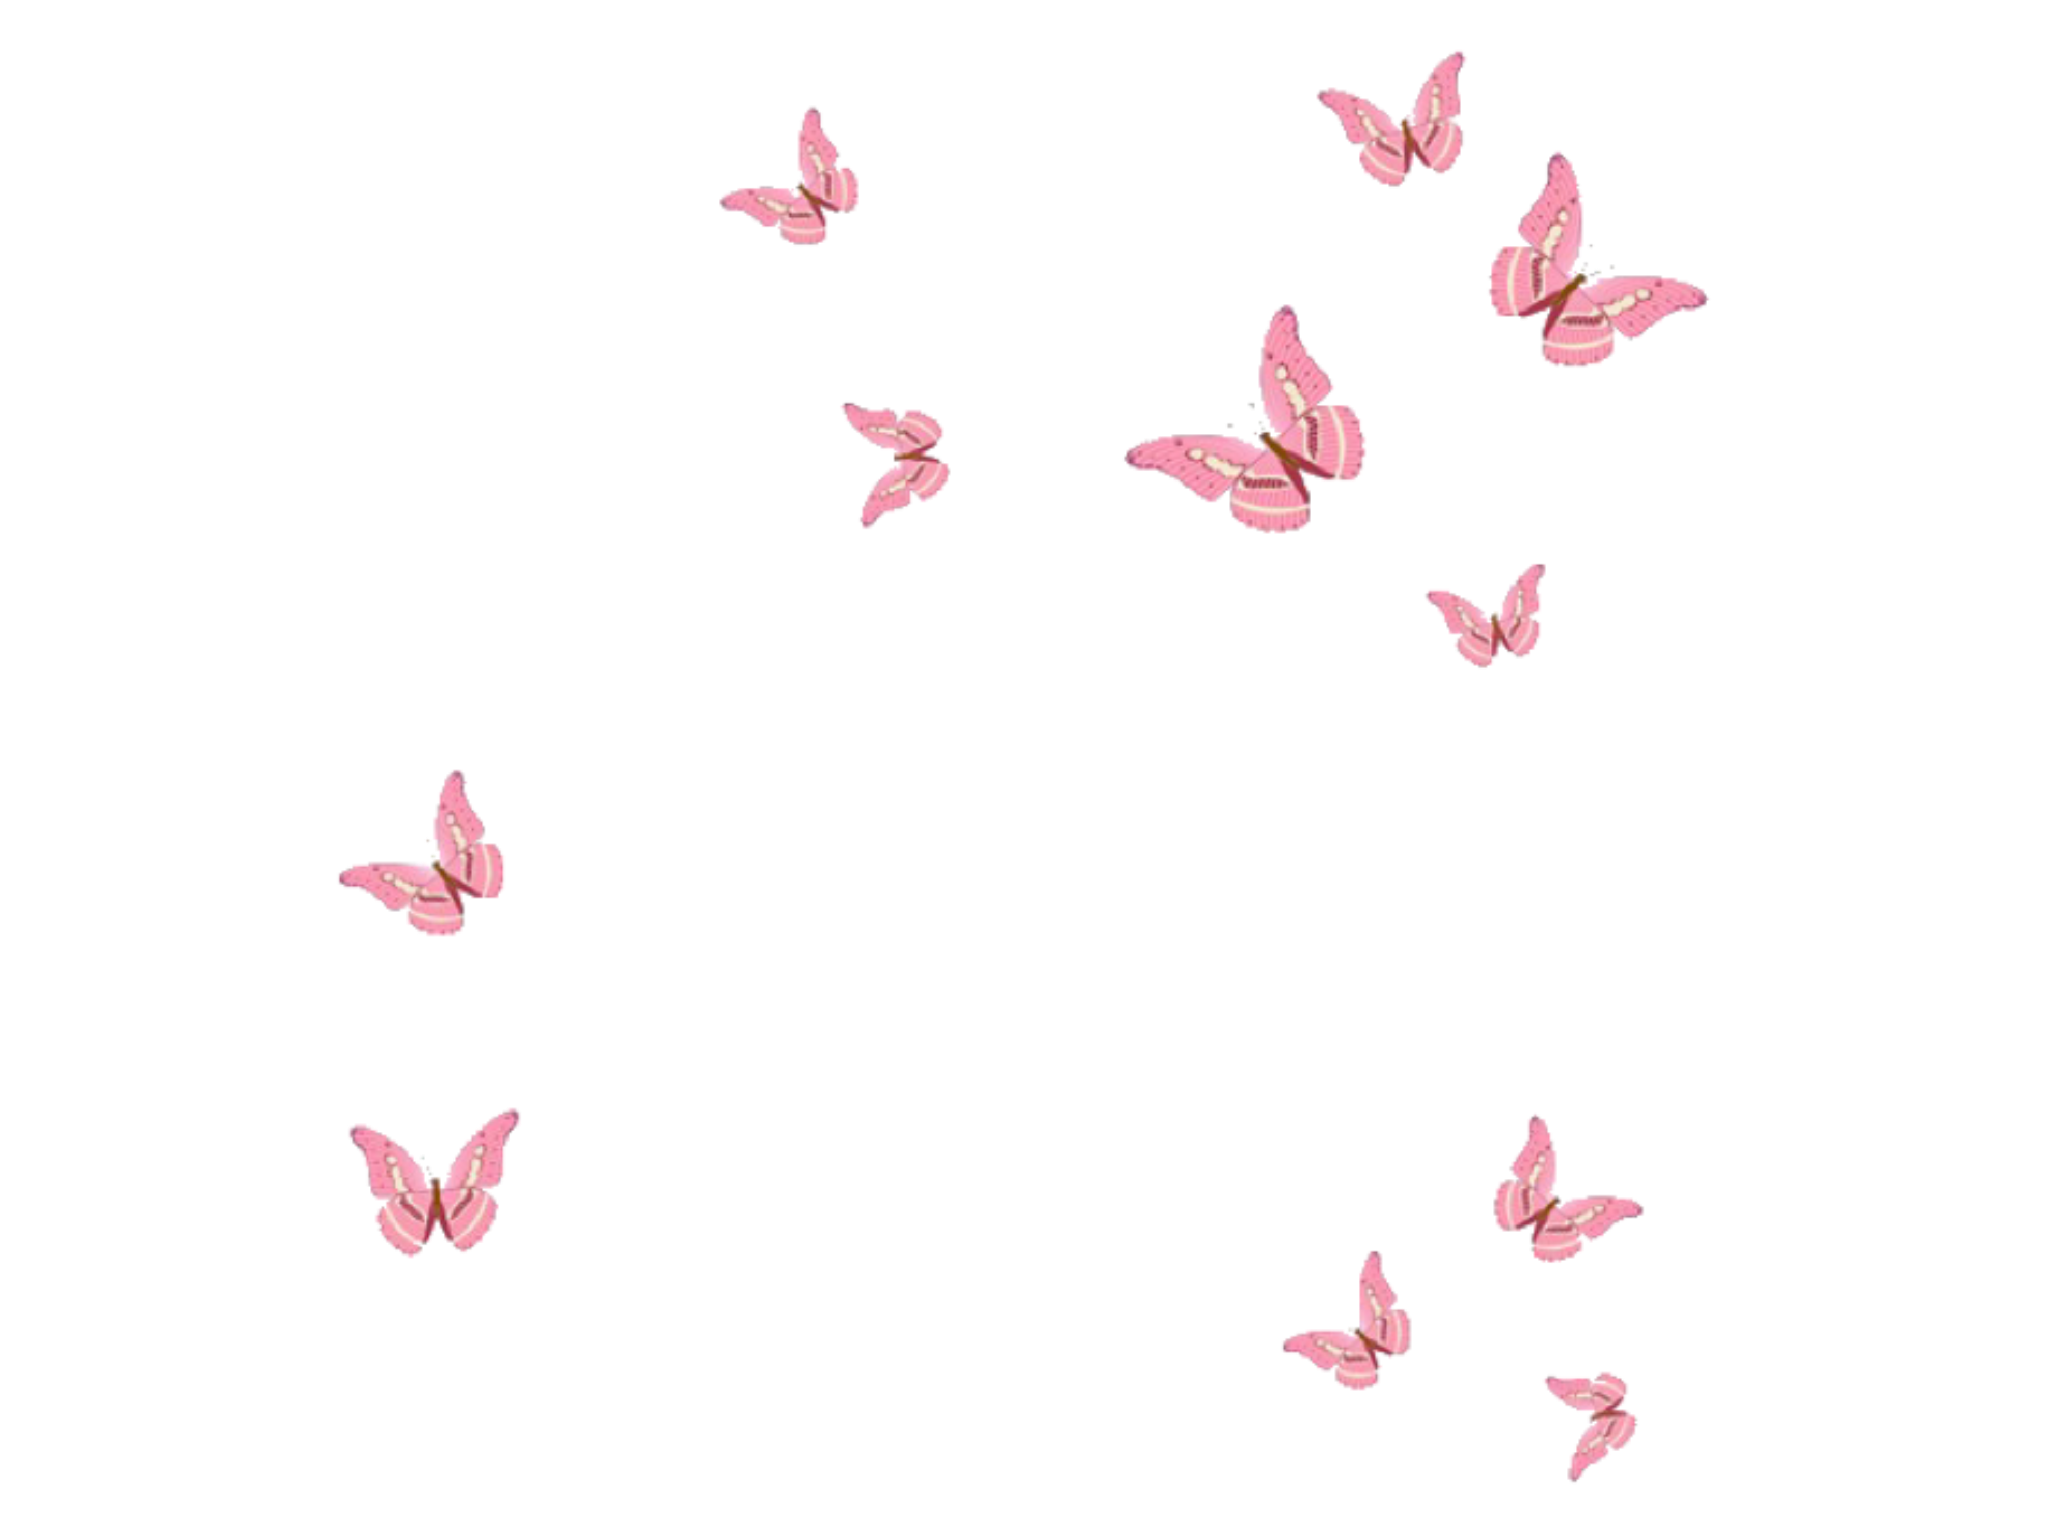 Transparent Butterfly Wallpaper Free Transparent Butterfly Background